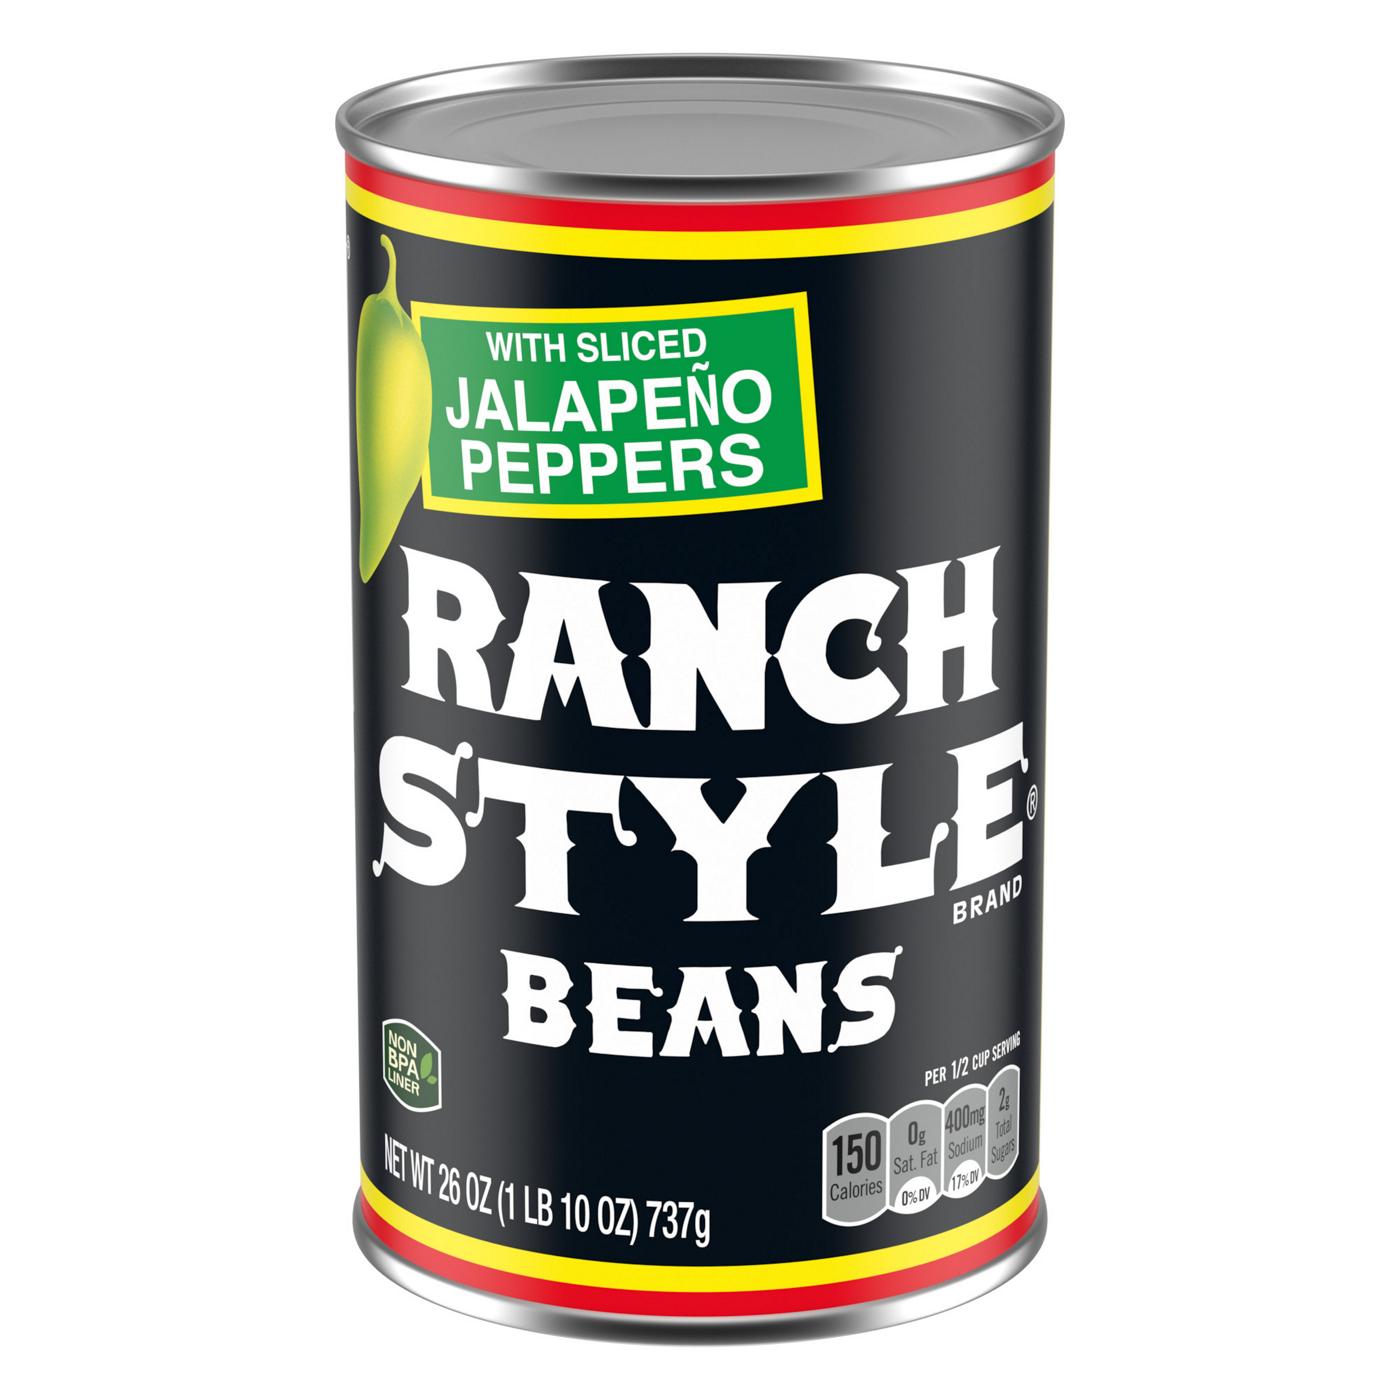 Ranch Style Beans Beans With Sliced Jalapeno Peppers Canned Beans; image 1 of 7